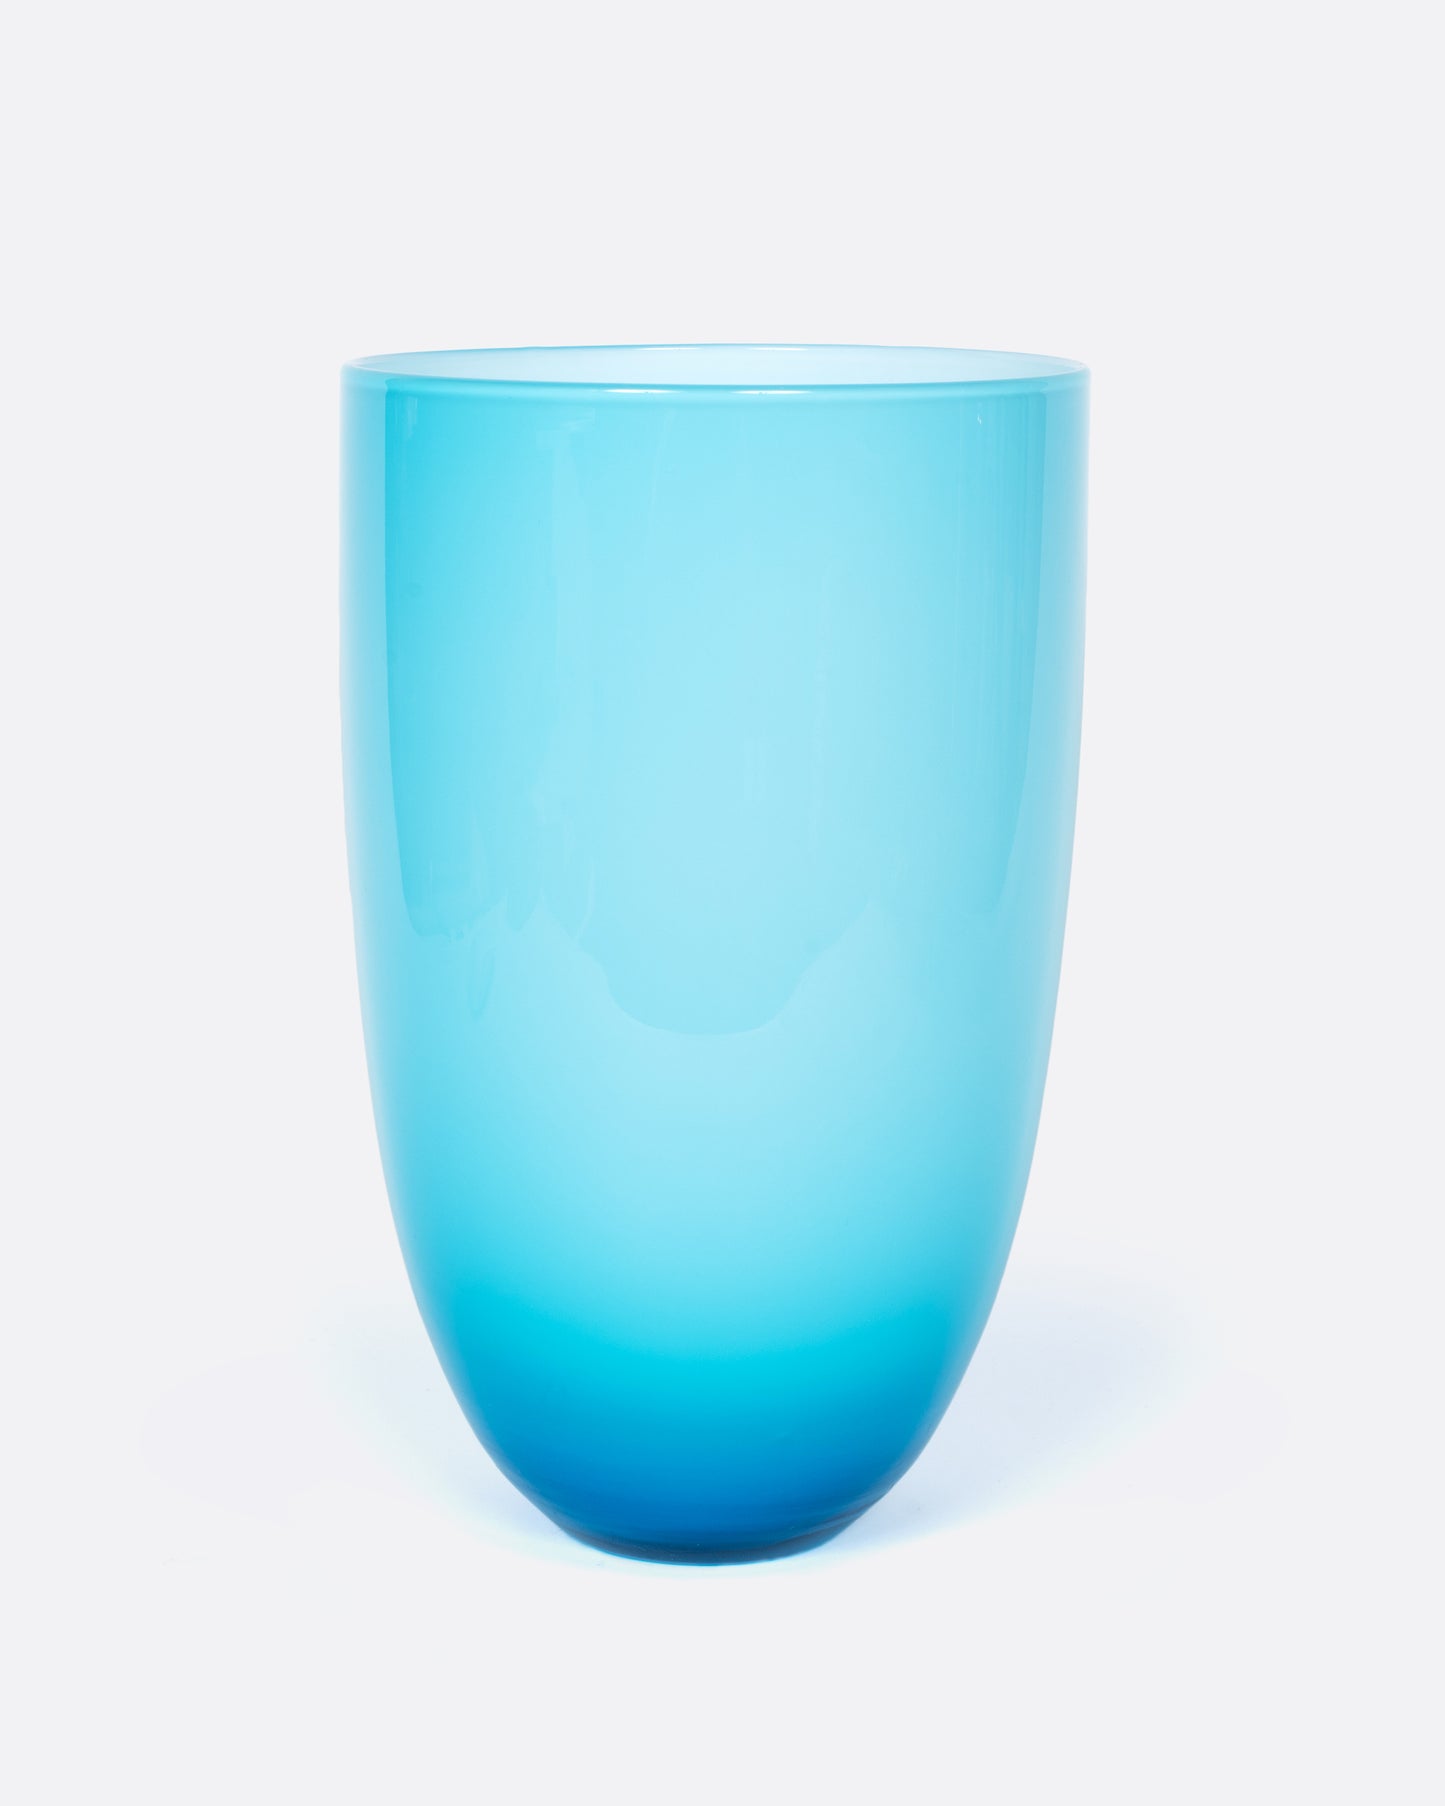 This sky blue vase has a layer of white glass on its interior to making the blue even brighter.